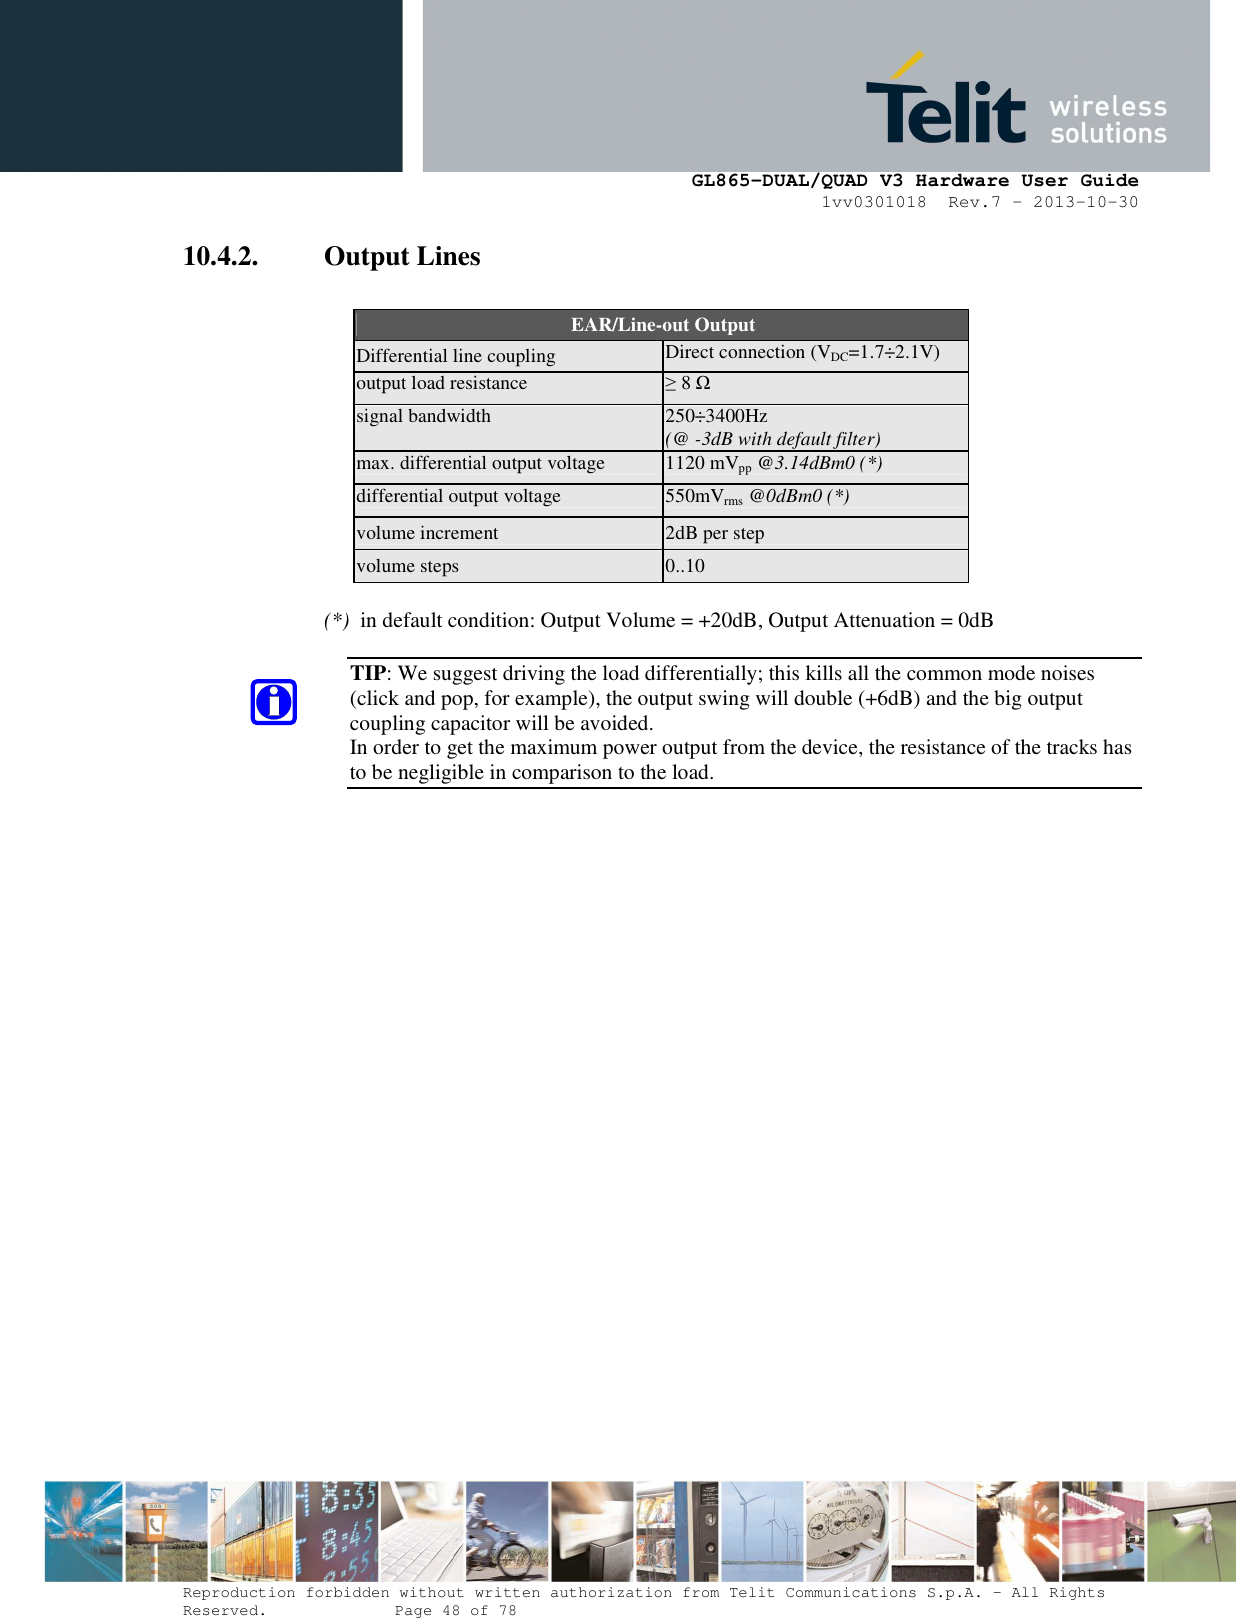      GL865-DUAL/QUAD V3 Hardware User Guide 1vv0301018  Rev.7 – 2013-10-30  Reproduction forbidden without written authorization from Telit Communications S.p.A. - All Rights Reserved.    Page 48 of 78 Mod. 0805 2011-07 Rev.2 10.4.2. Output Lines    EAR/Line-out Output Differential line coupling Direct connection (VDC=1.7÷2.1V) output load resistance ≥ 8 Ω signal bandwidth 250÷3400Hz (@ -3dB with default filter) max. differential output voltage  1120 mVpp @3.14dBm0 (*) differential output voltage  550mVrms @0dBm0 (*) volume increment  2dB per step volume steps  0..10  (*)  in default condition: Output Volume = +20dB, Output Attenuation = 0dB  TIP: We suggest driving the load differentially; this kills all the common mode noises (click and pop, for example), the output swing will double (+6dB) and the big output coupling capacitor will be avoided. In order to get the maximum power output from the device, the resistance of the tracks has to be negligible in comparison to the load.        